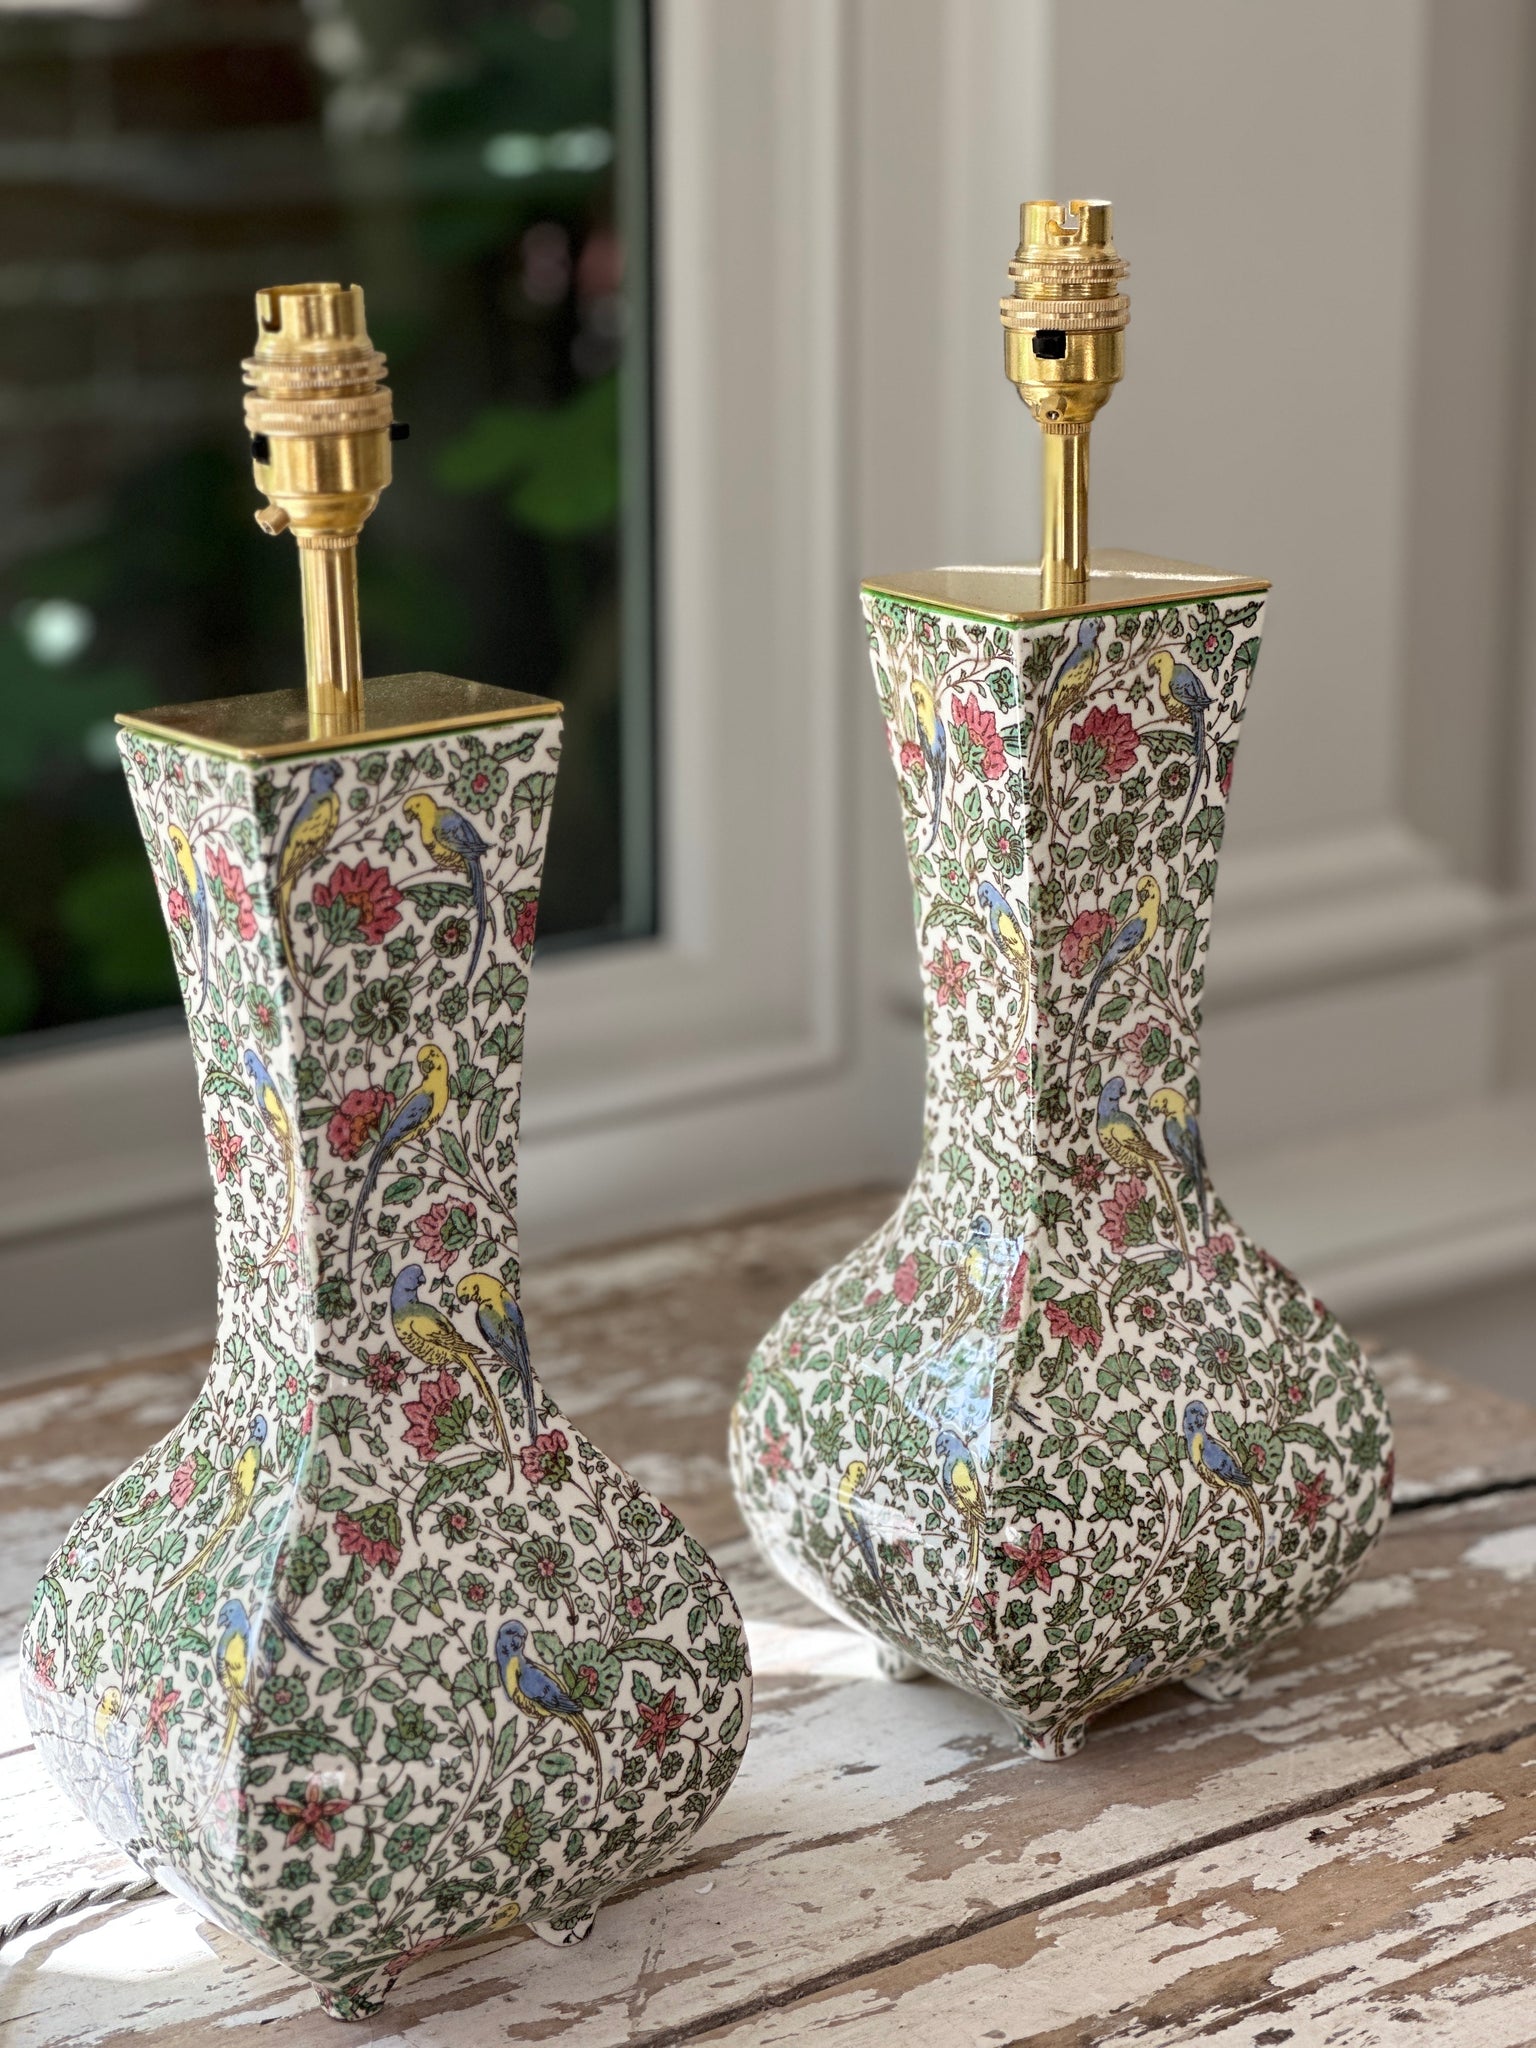 Pair of Royal Doulton ‘Persian’ Vases converted to table lamps